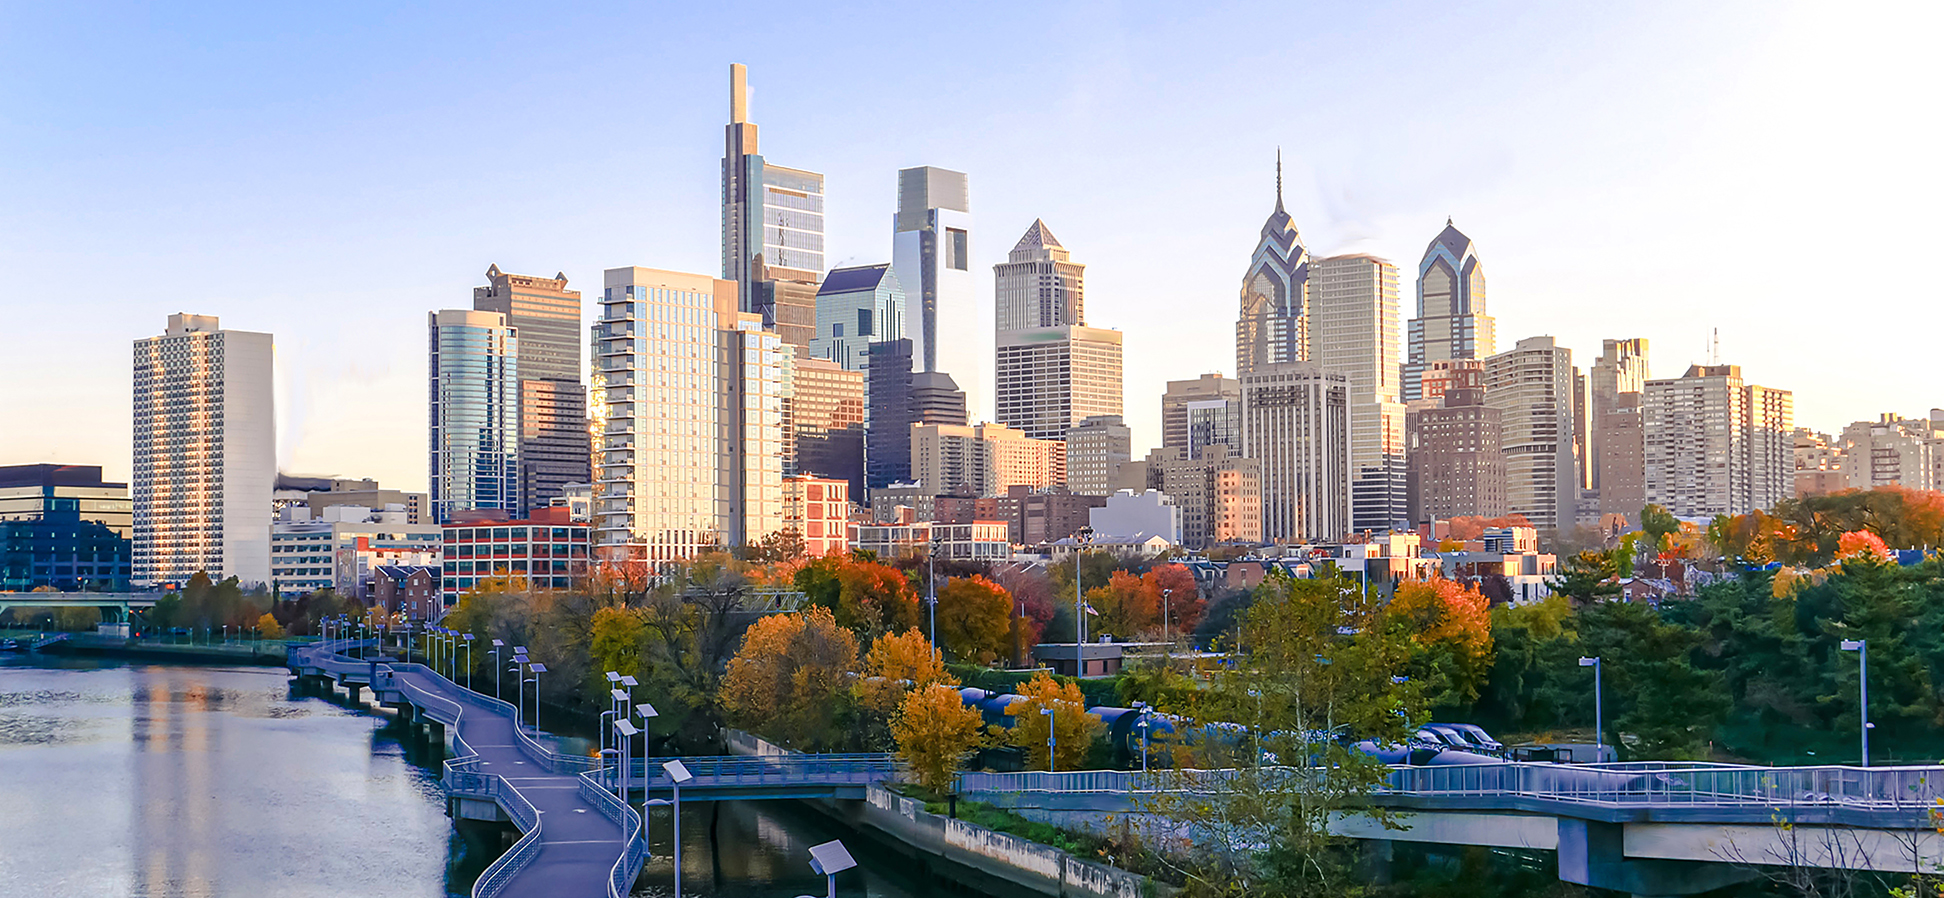 SpotHero Fall Picks: Our Top 7 Things to do in Philadelphia this Fall